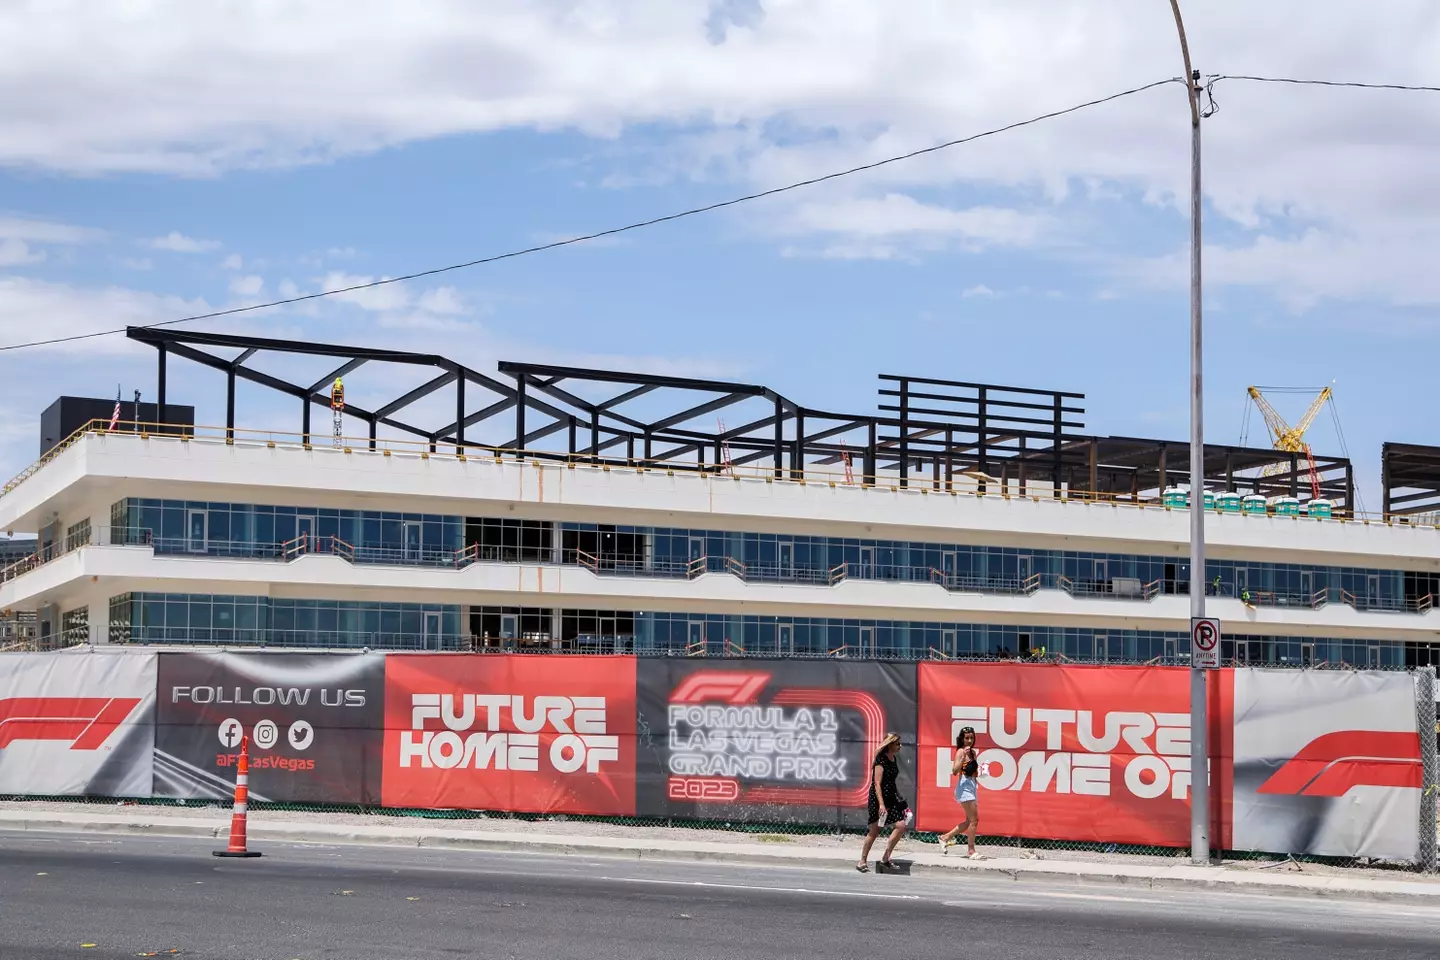 Construction of the Formula 1 track in Las Vegas is under way. (